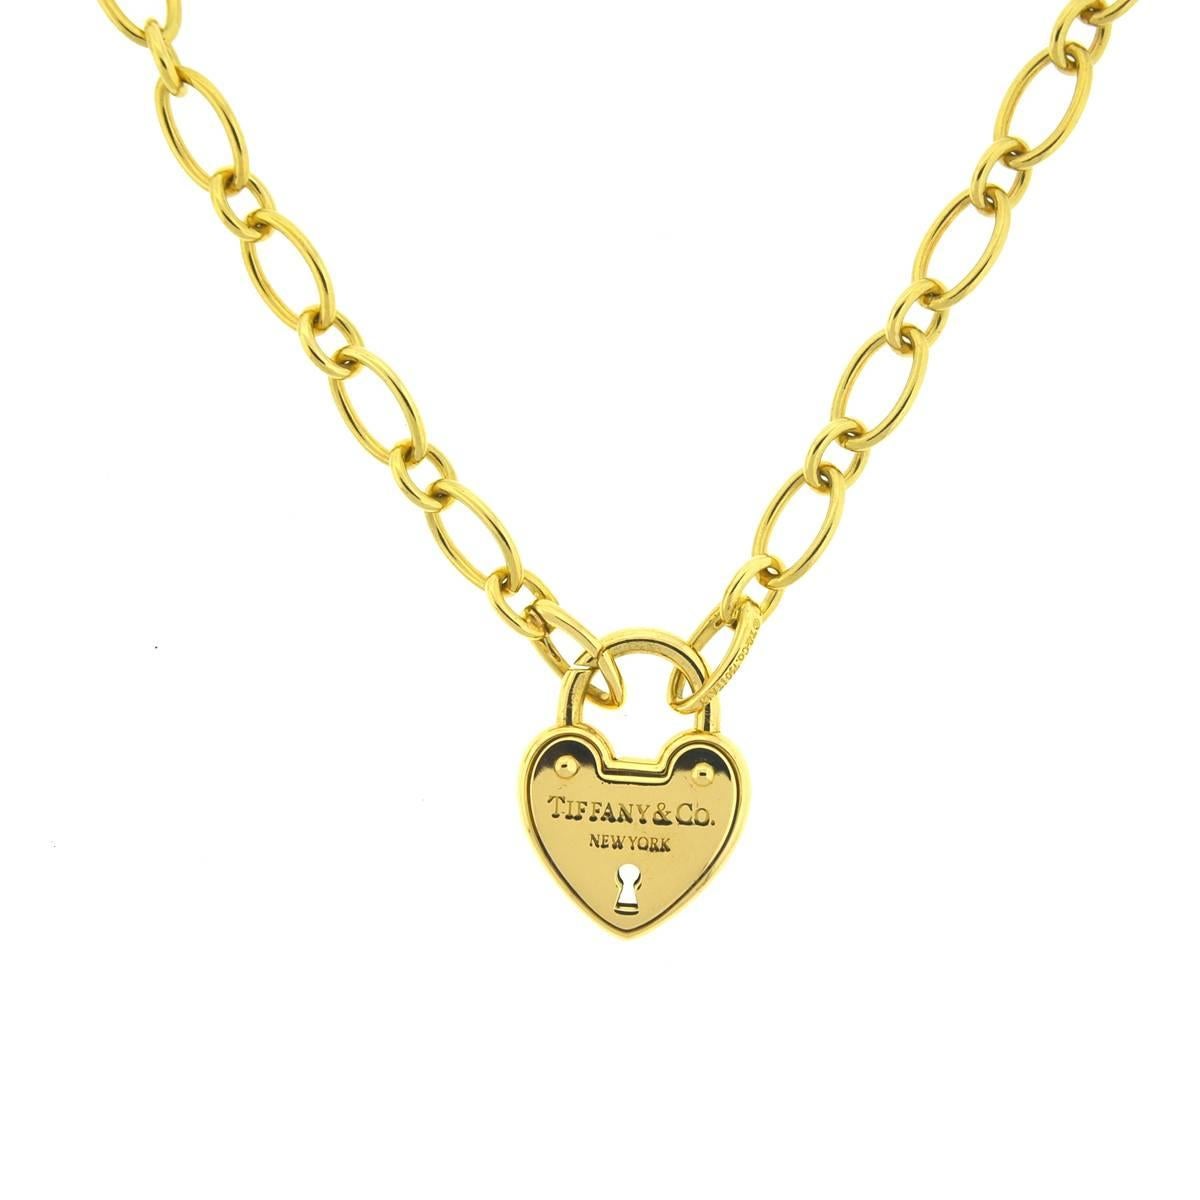 Company - Tiffany & Co.
Style - Heart Lock Necklace
Metal - 18k Yellow Gold
Chain Length - 18